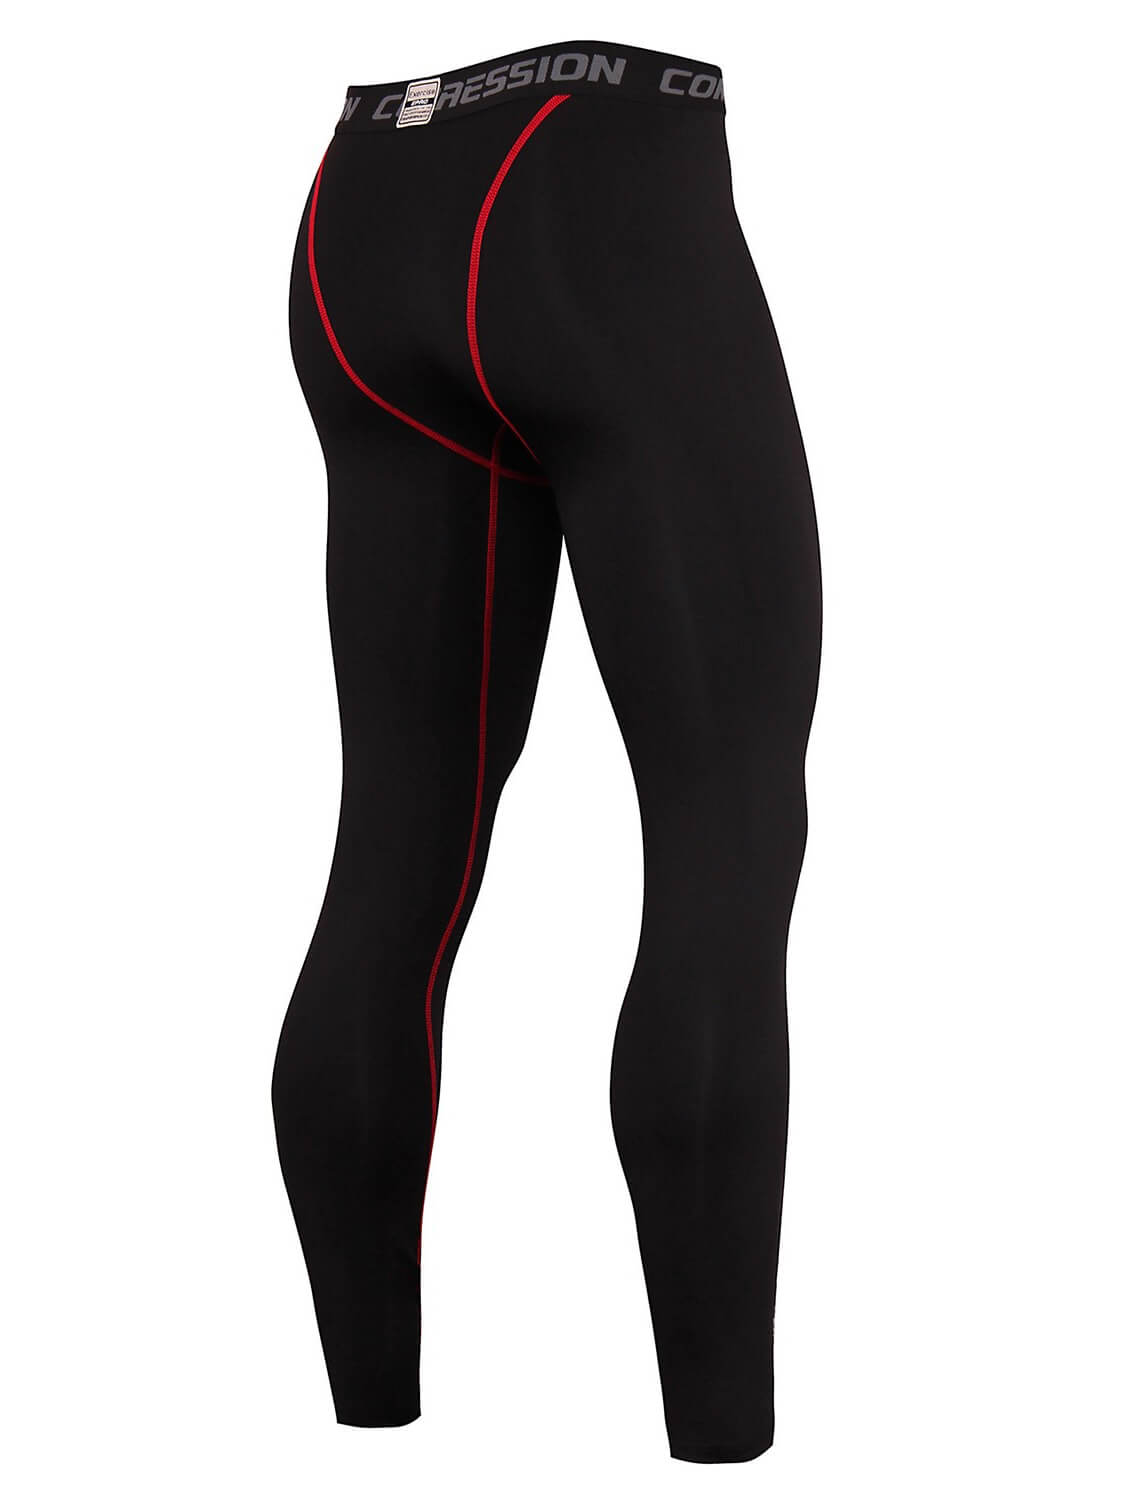 Male Sports Compression Tights / Fitness Leggings for Men - SF0790